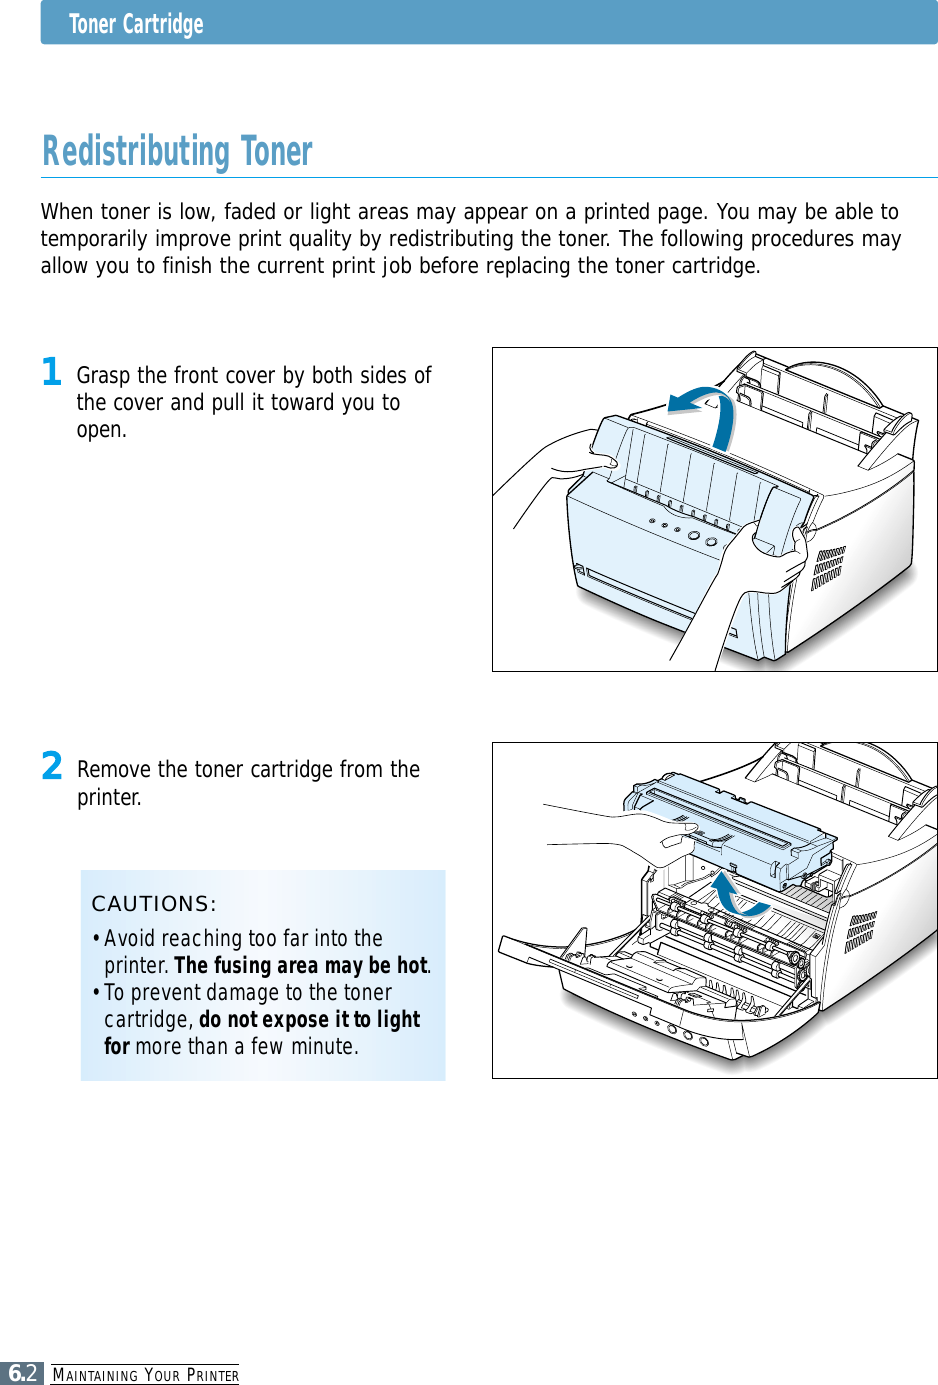 MAINTAINING YOUR PRINTER6.2Toner CartridgeWhen toner is low, faded or light areas may appear on a printed page. You may be able totemporarily improve print quality by redistributing the toner. The following procedures mayallow you to finish the current print job before replacing the toner cartridge.Redistributing Toner1Grasp the front cover by both sides ofthe cover and pull it toward you toopen.2Remove the toner cartridge from theprinter.CAUTIONS:• Avoid reaching too far into theprinter. The fusing area may be hot.• To prevent damage to the tonercartridge, do not expose it to lightfor more than a few minute.